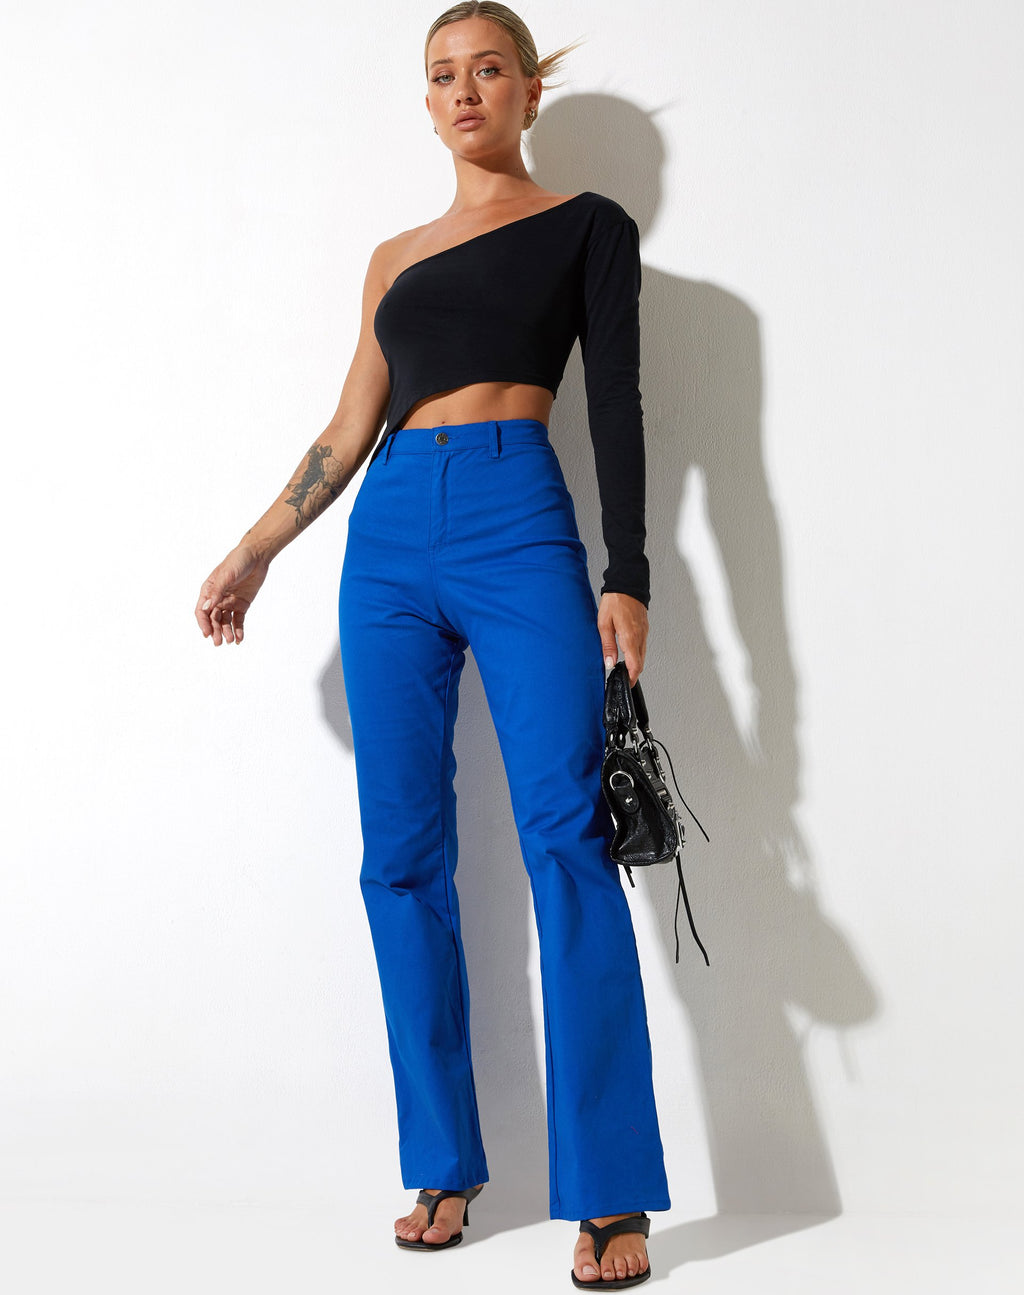 Zoven Flare Trouser in Twill Cobalt Blue